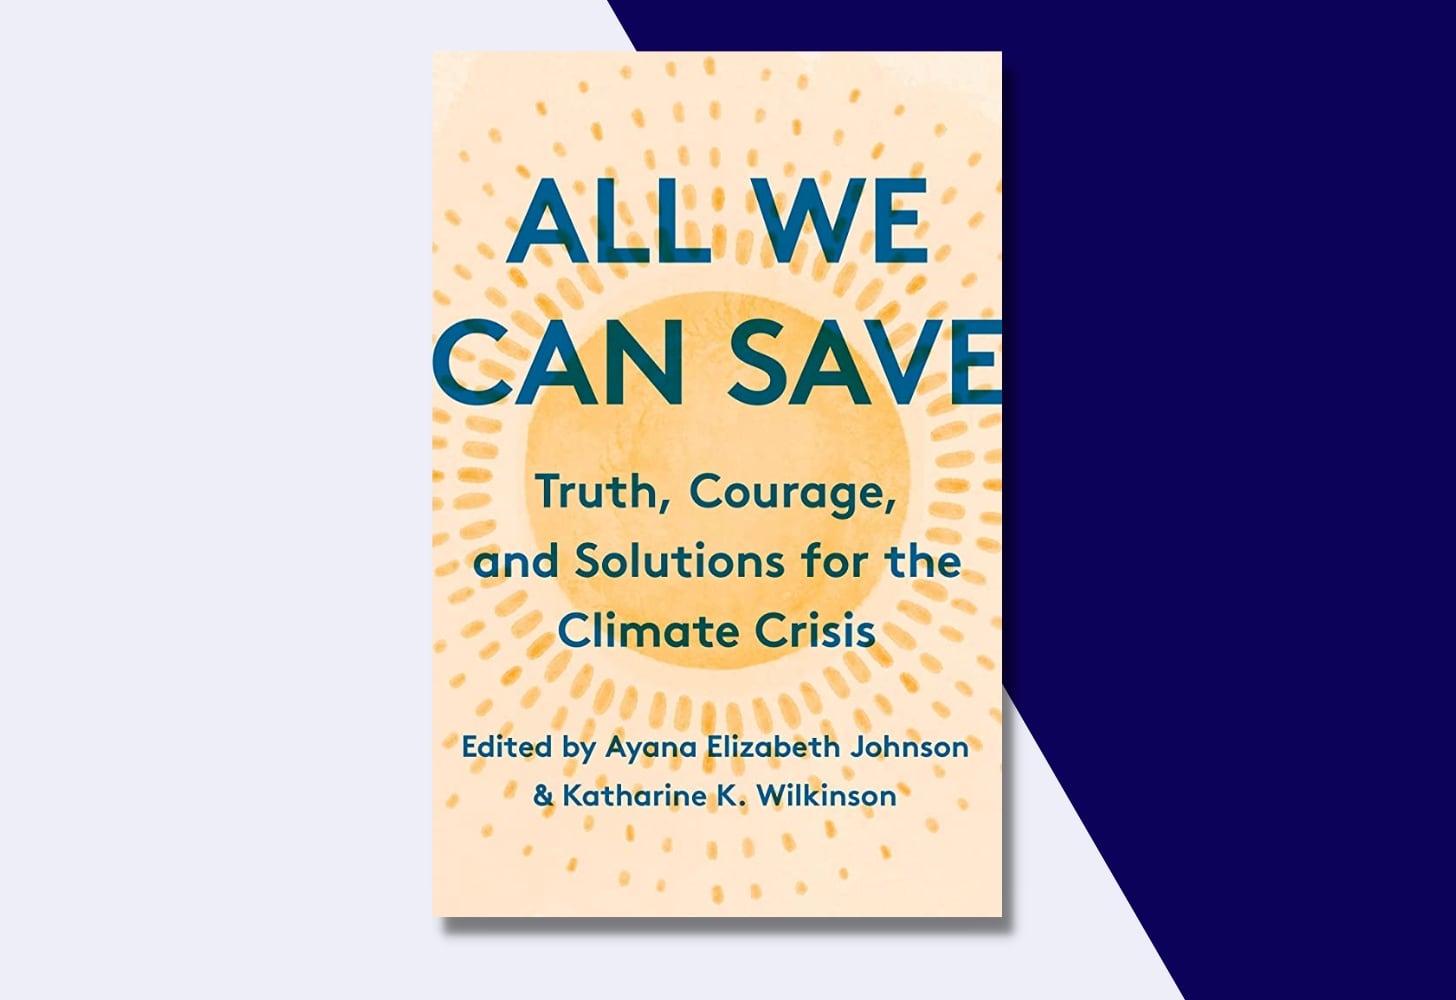 “All We Can Save: Truth, Courage, and Solutions for the Climate Crisis” edited by Ayana Elizabeth Johnson and Katharine K. Wilkinson